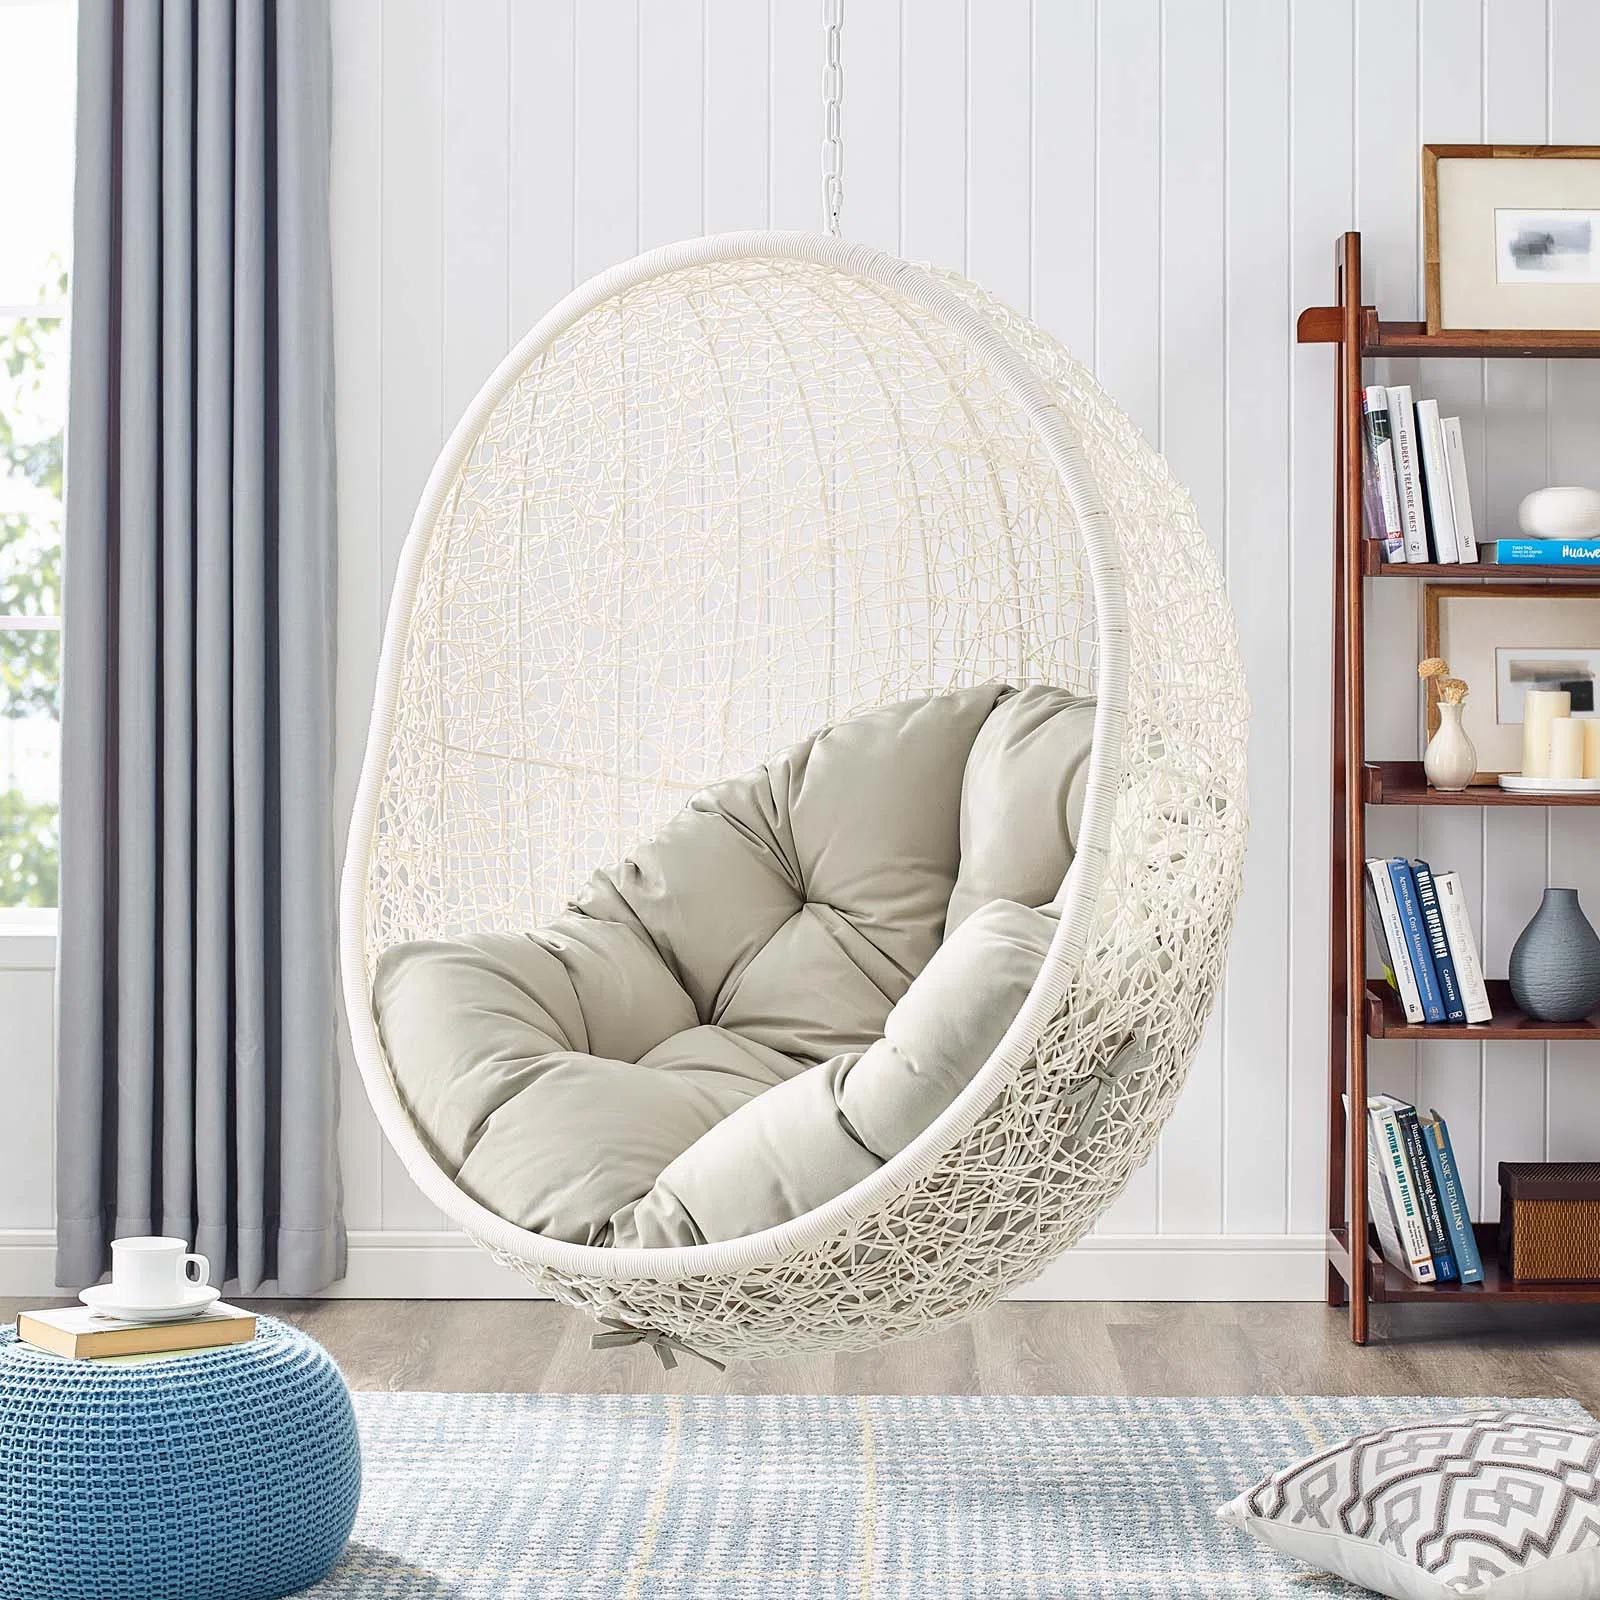 The 5 Best Hanging Chairs For Relaxing